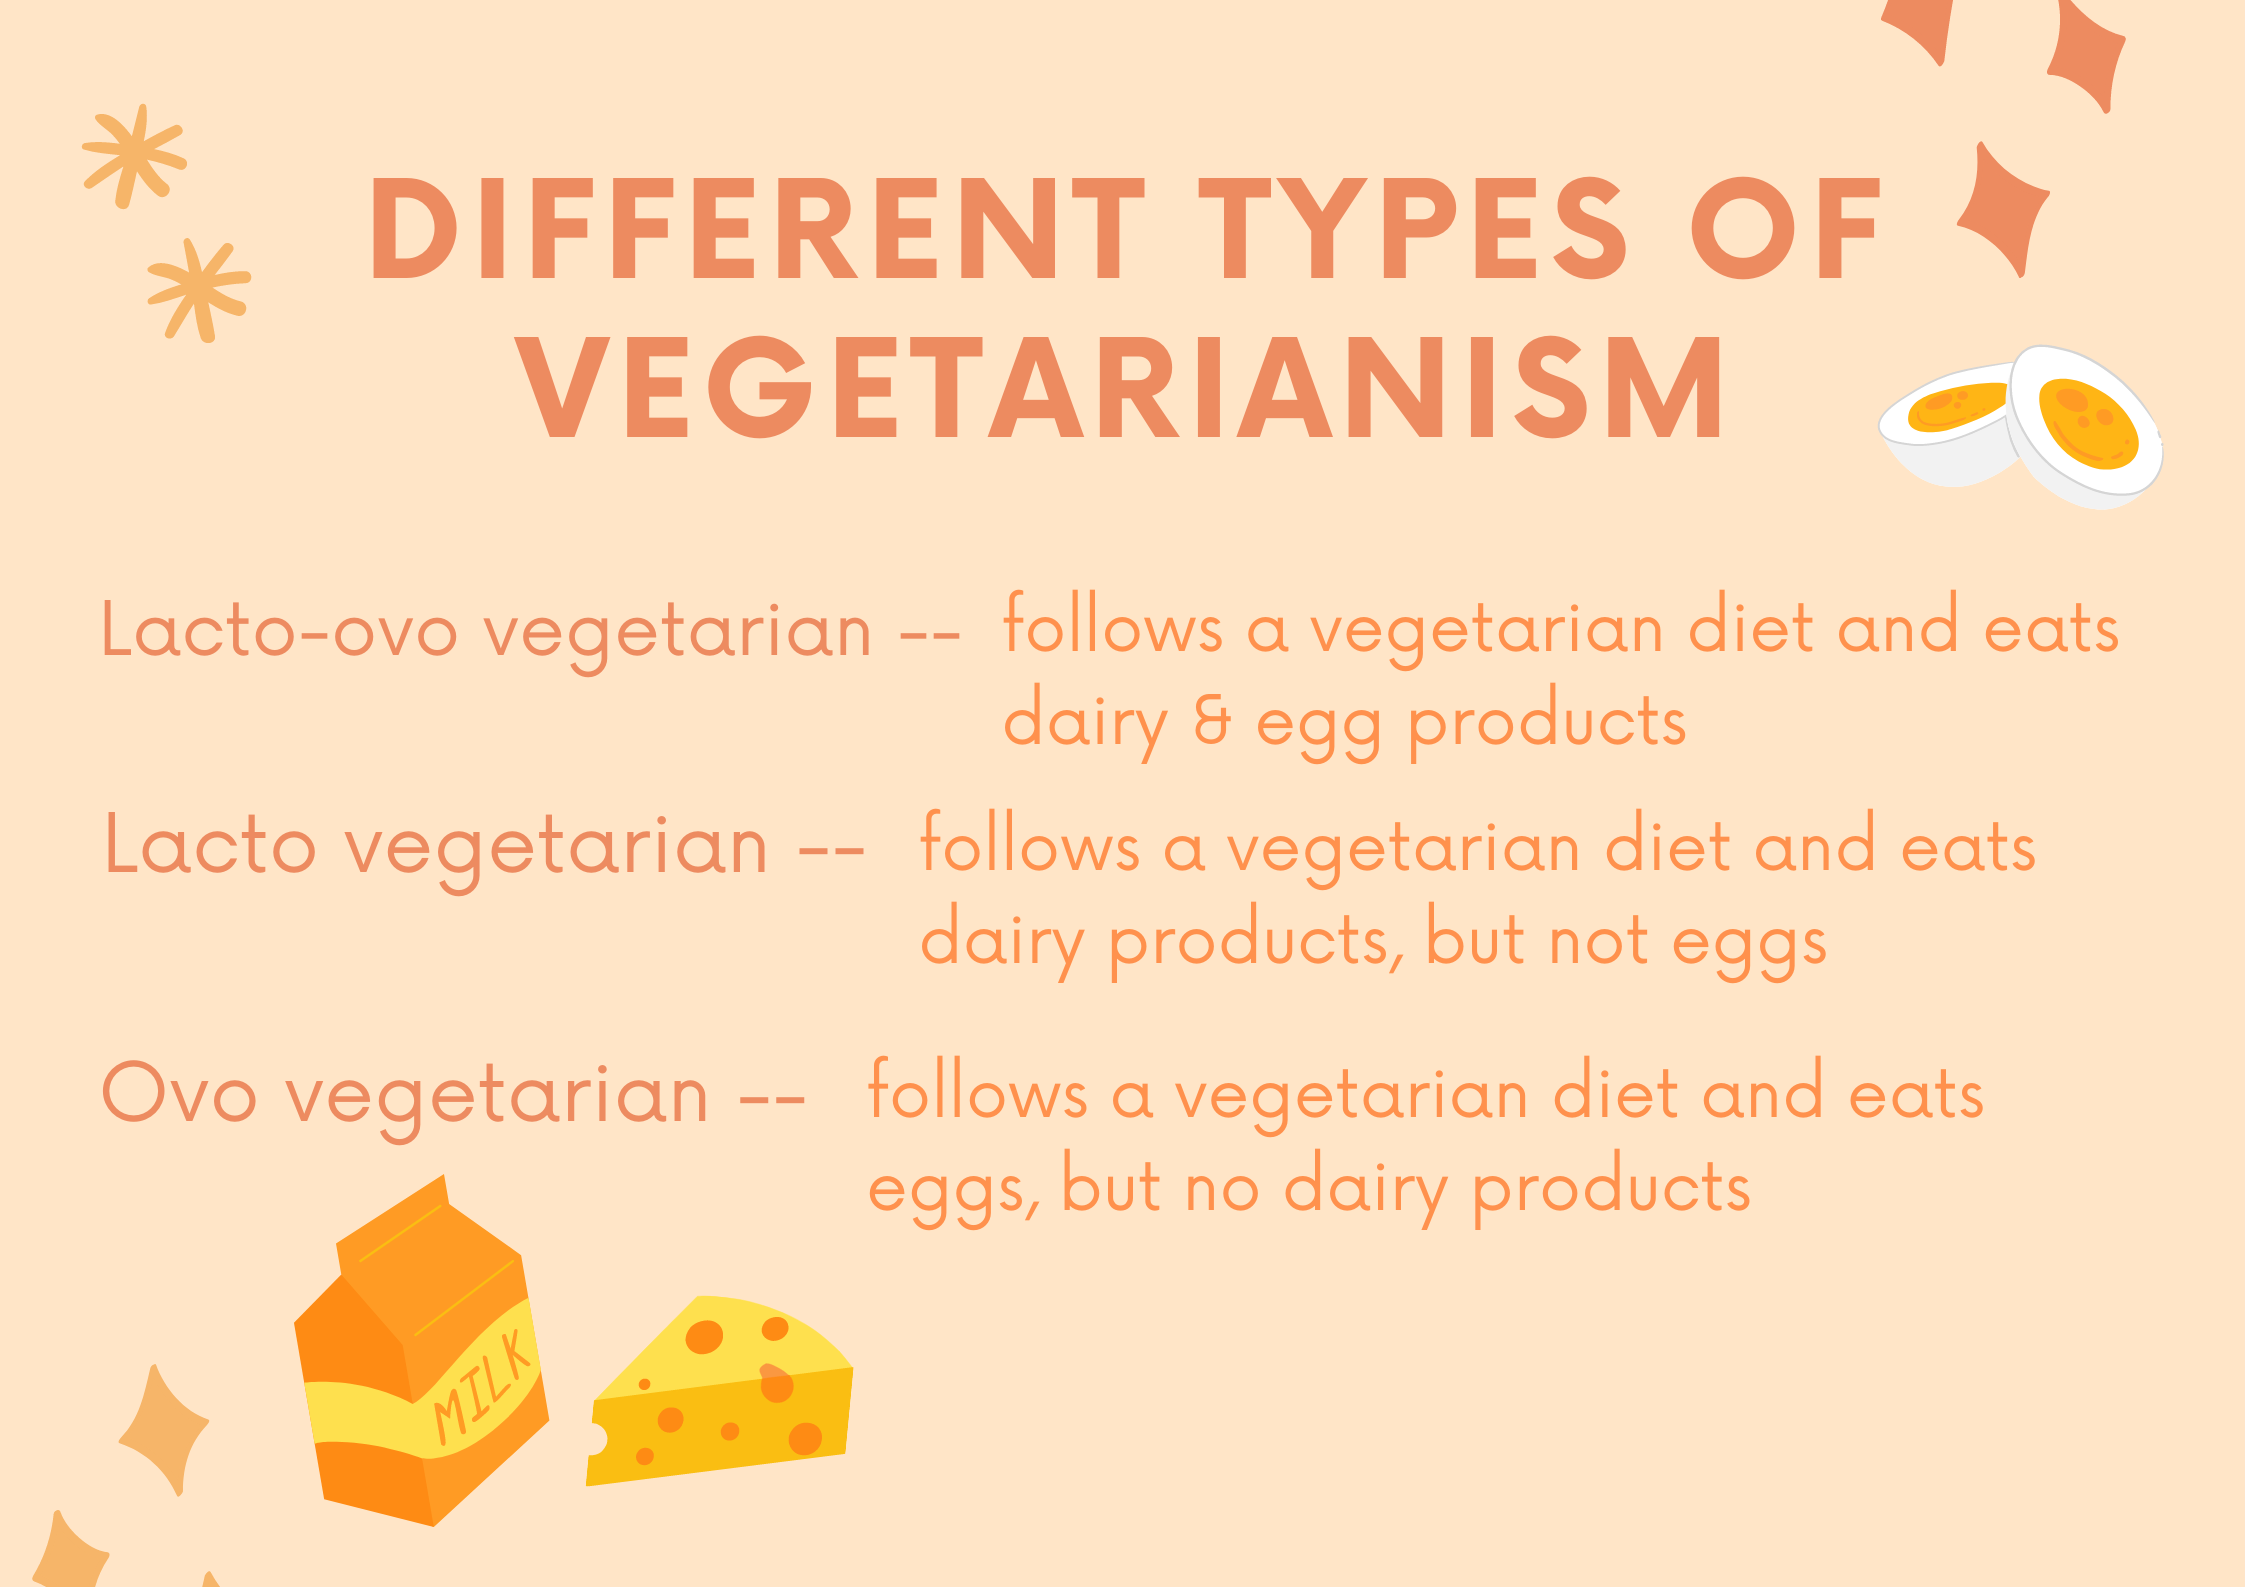 Different types of vegetarianism.